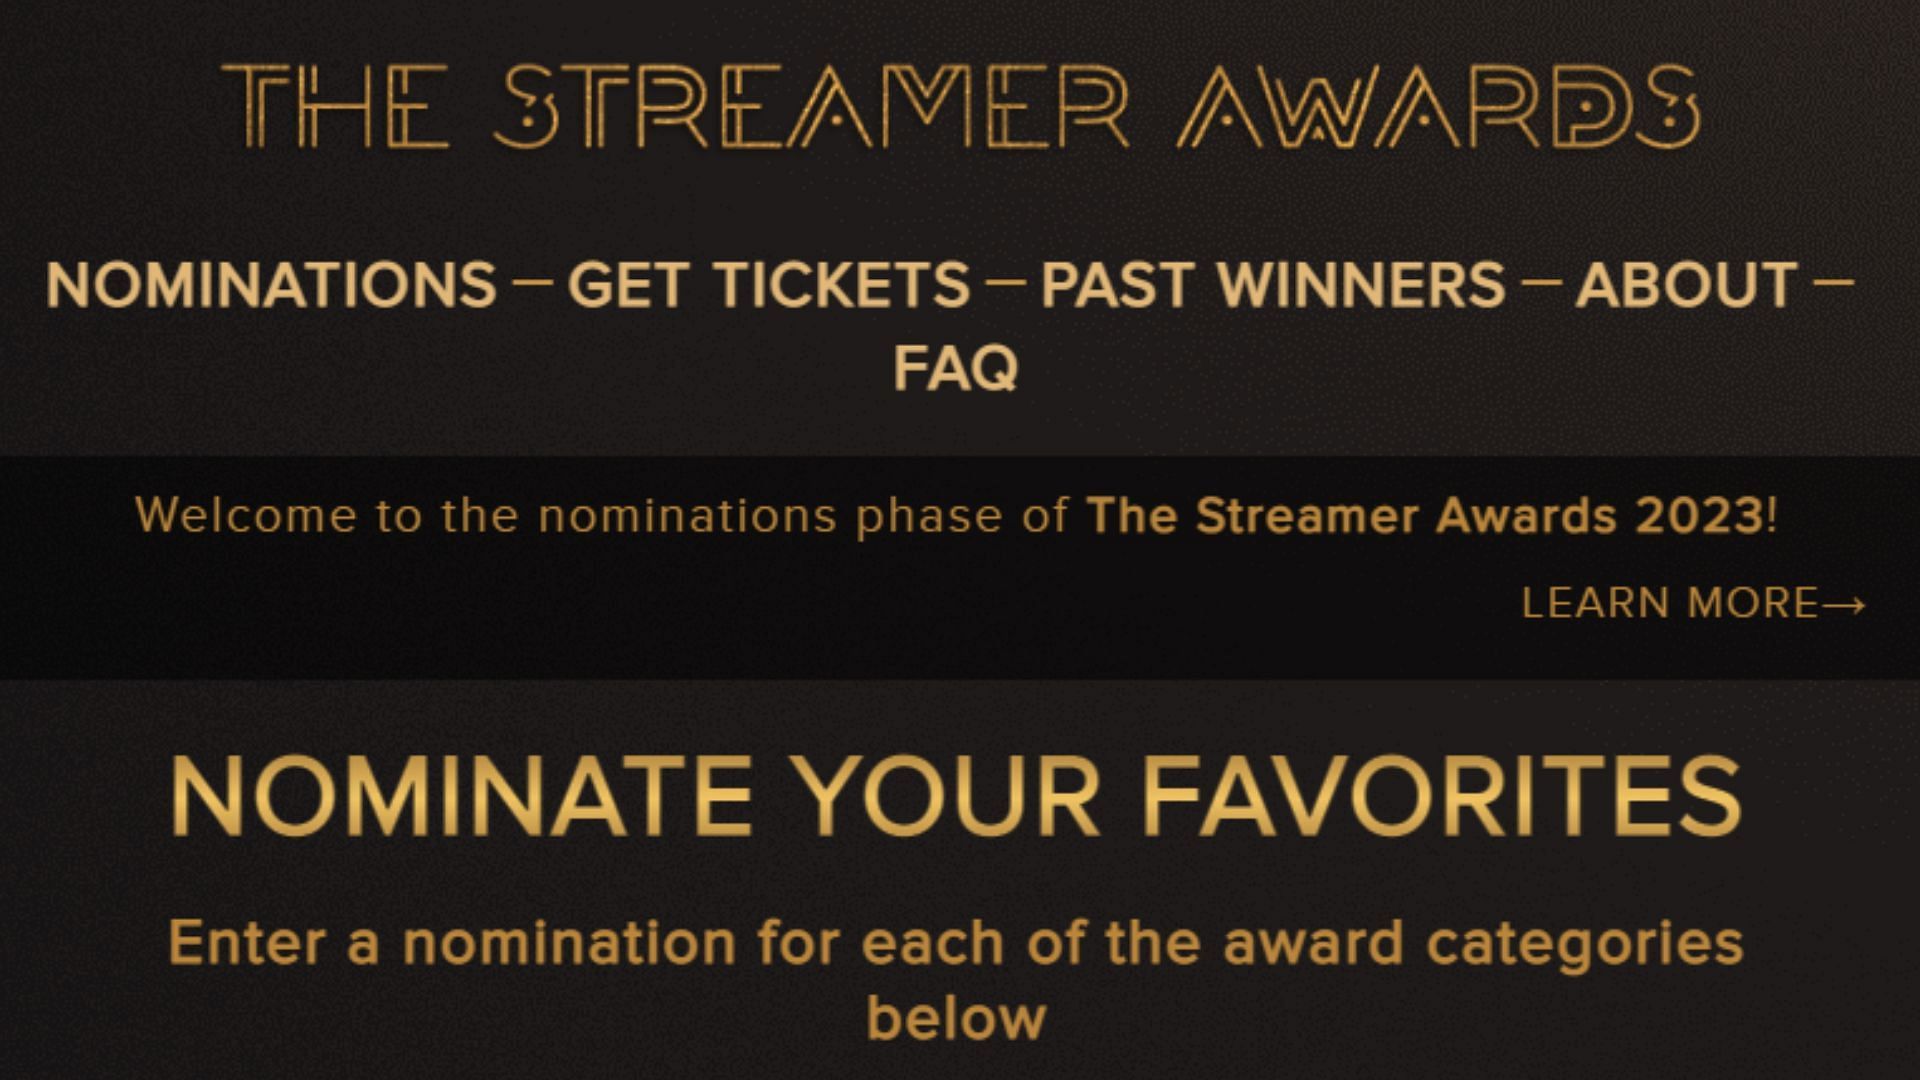 How to vote for your favorite streamers for The Streamer Awards 2023